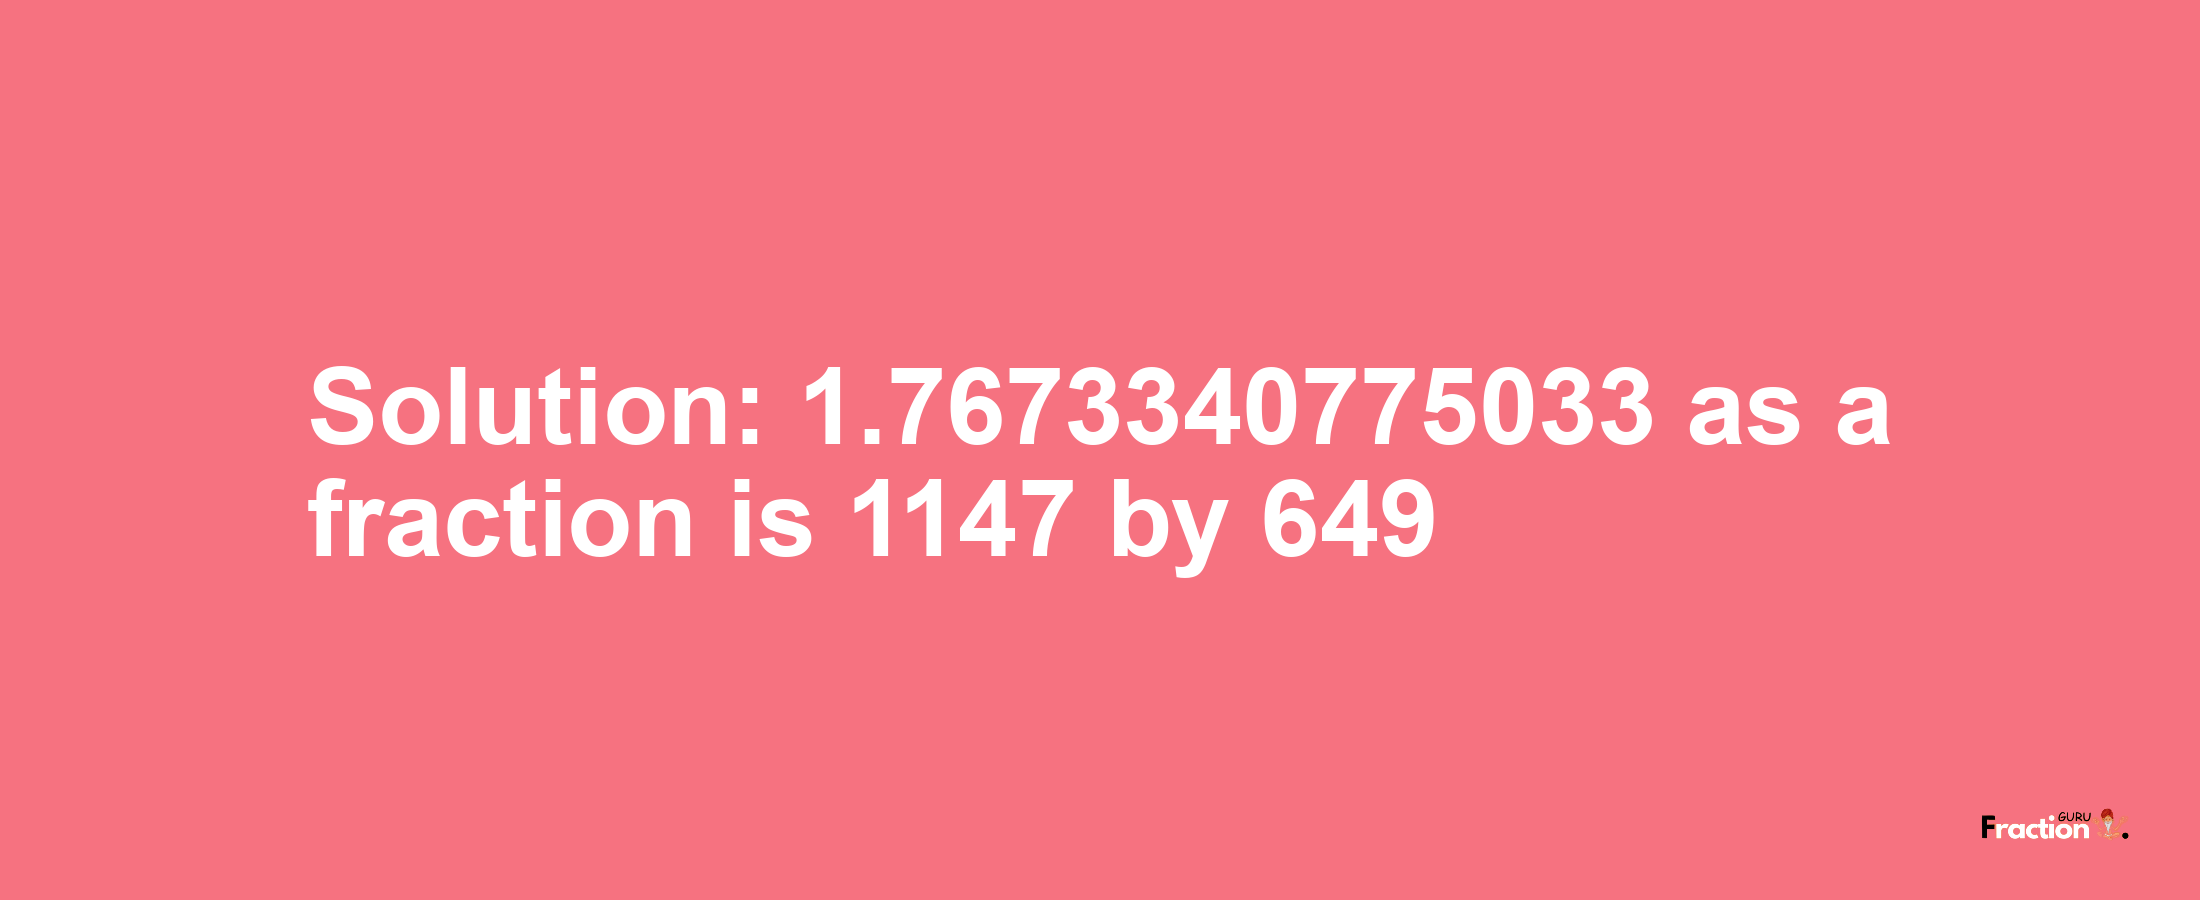 Solution:1.7673340775033 as a fraction is 1147/649